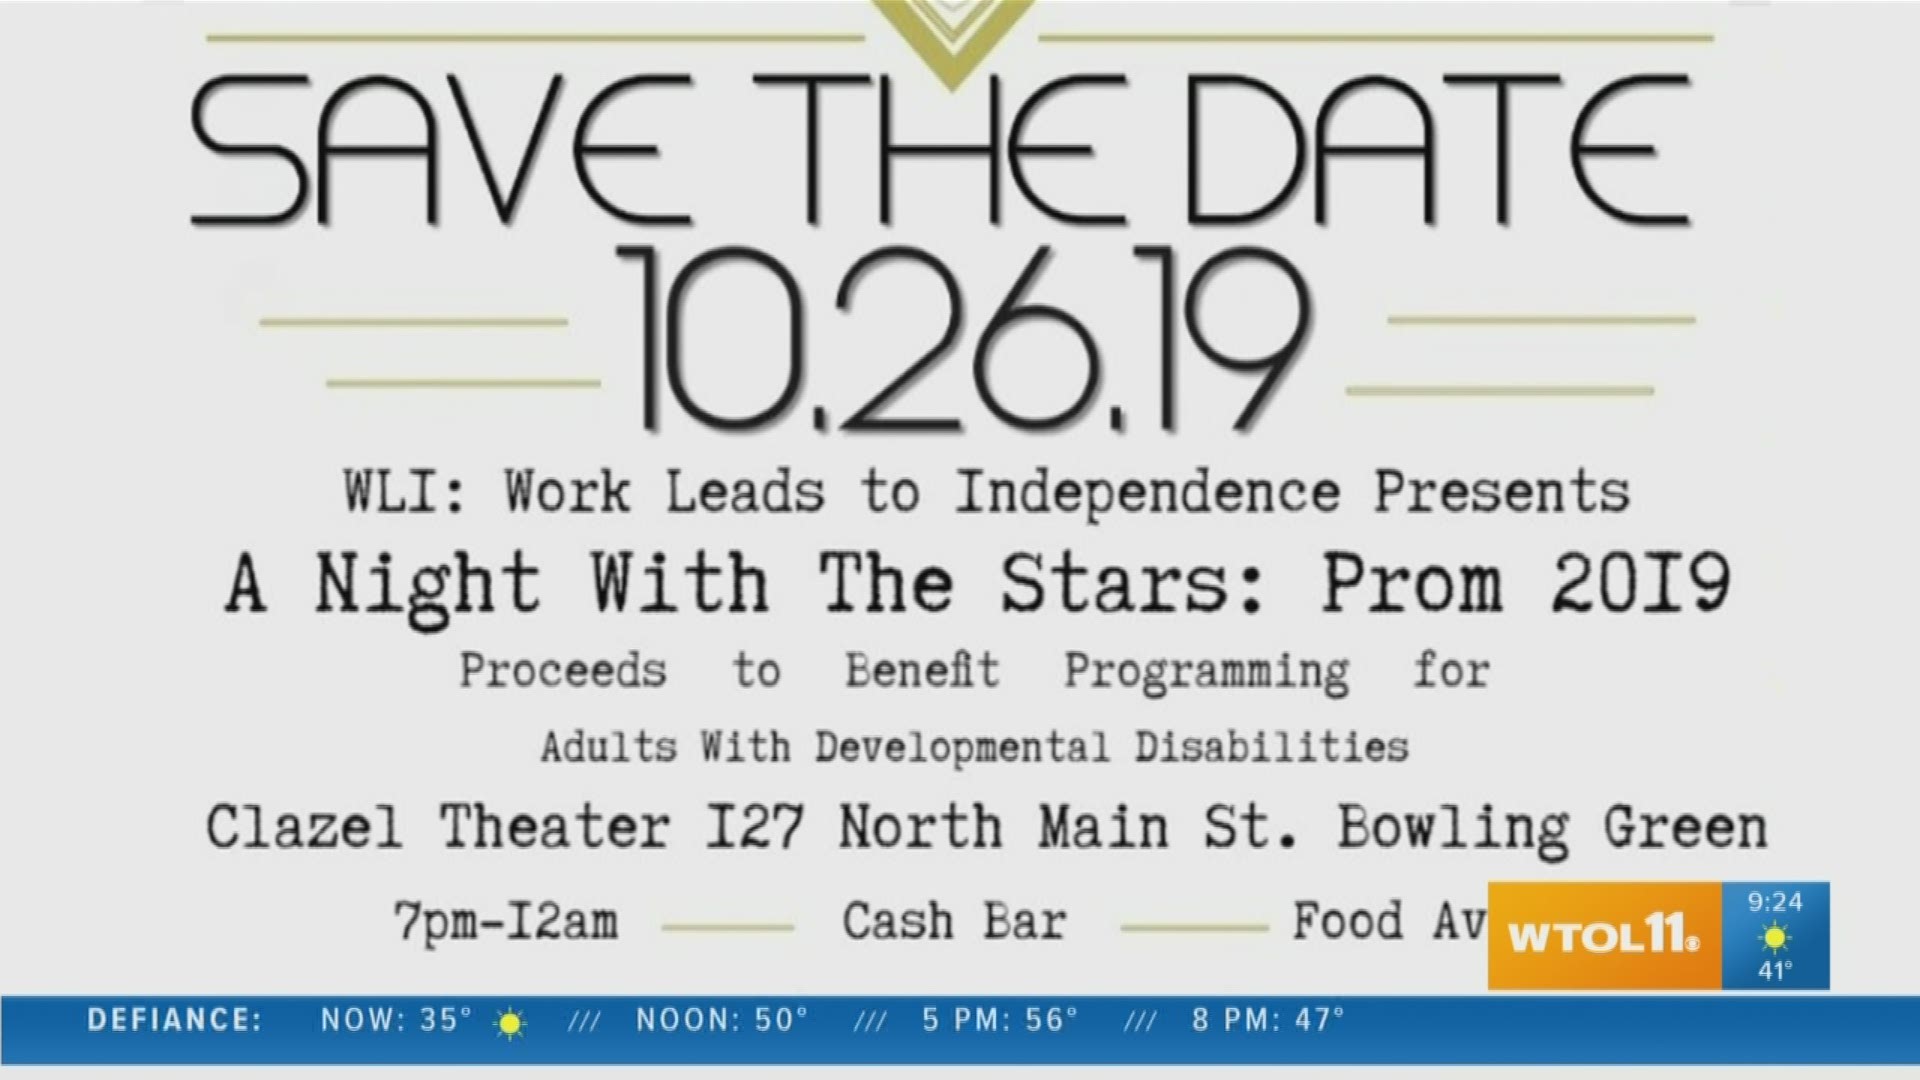 Work Leads to Independence helps those with disabilities, and you can help, too, with the Night With The Stars Prom 2019.